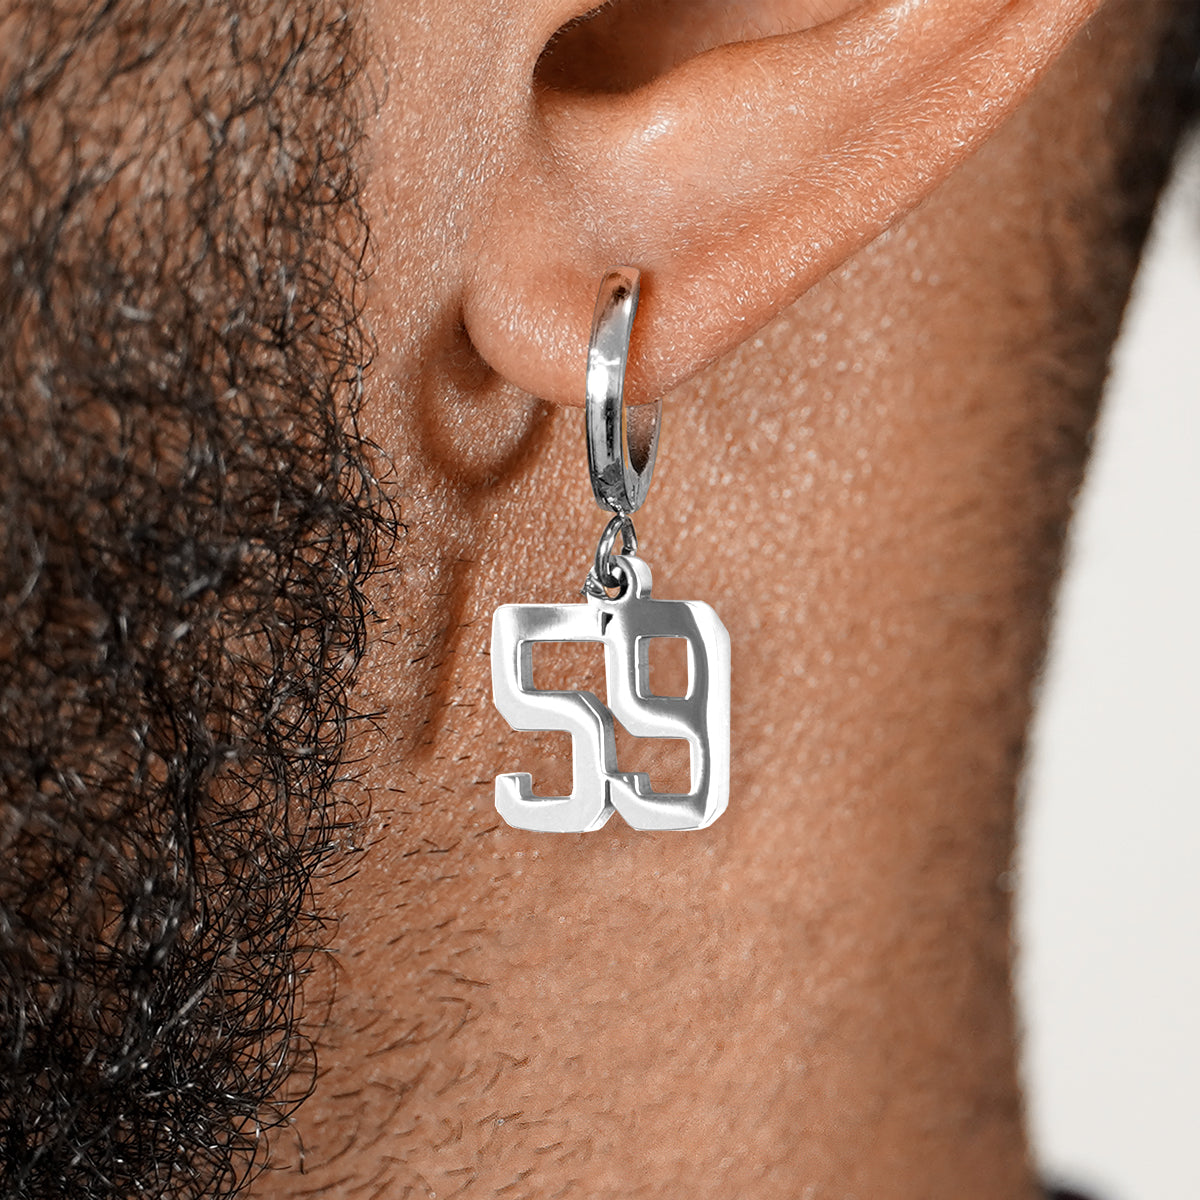 59 Number Earring - Stainless Steel